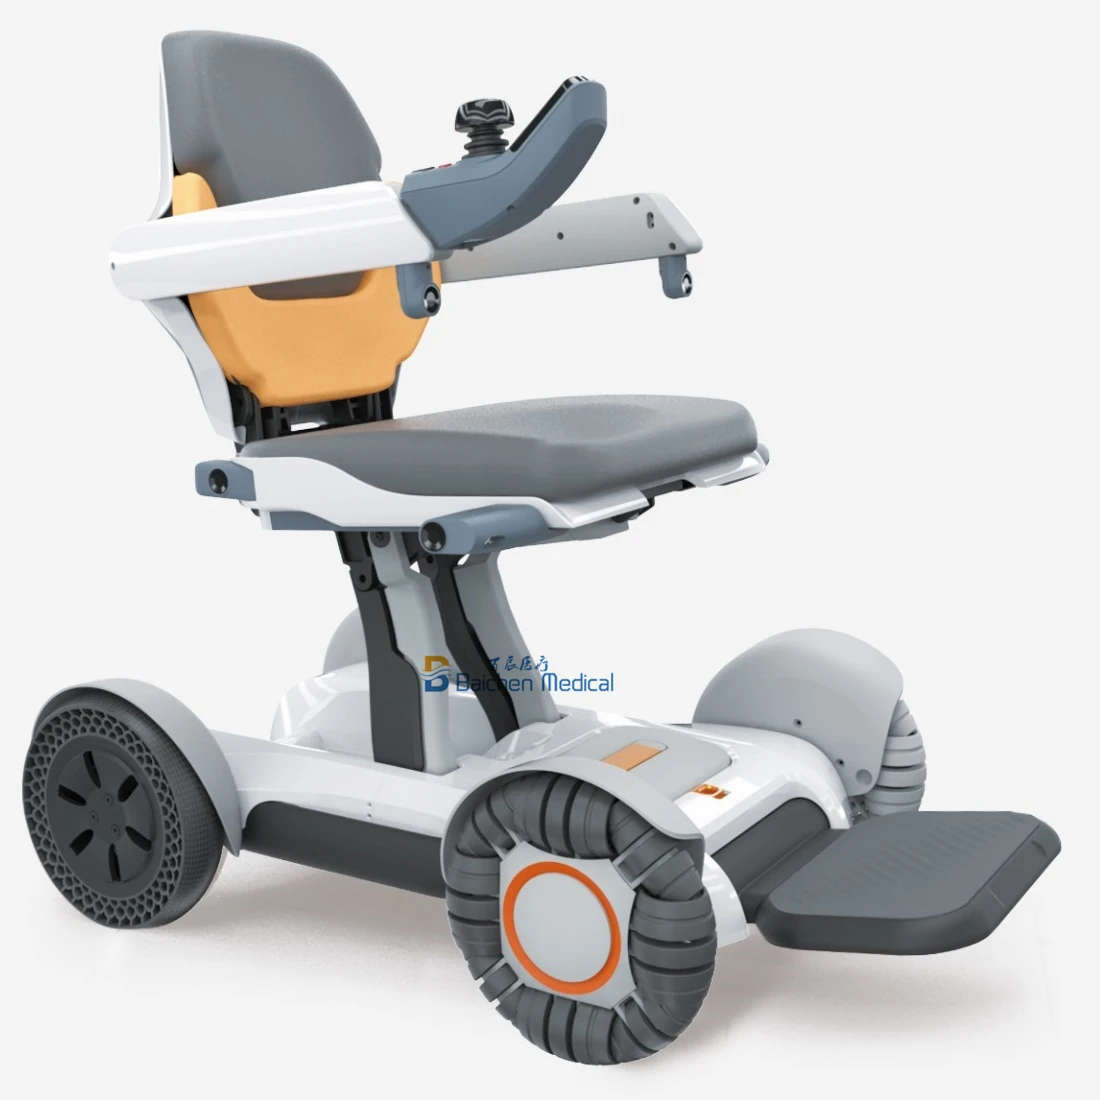 

The Most Popular Intelligent Robot auto Folding Smart Electric Wheelchair Mobility Scooters